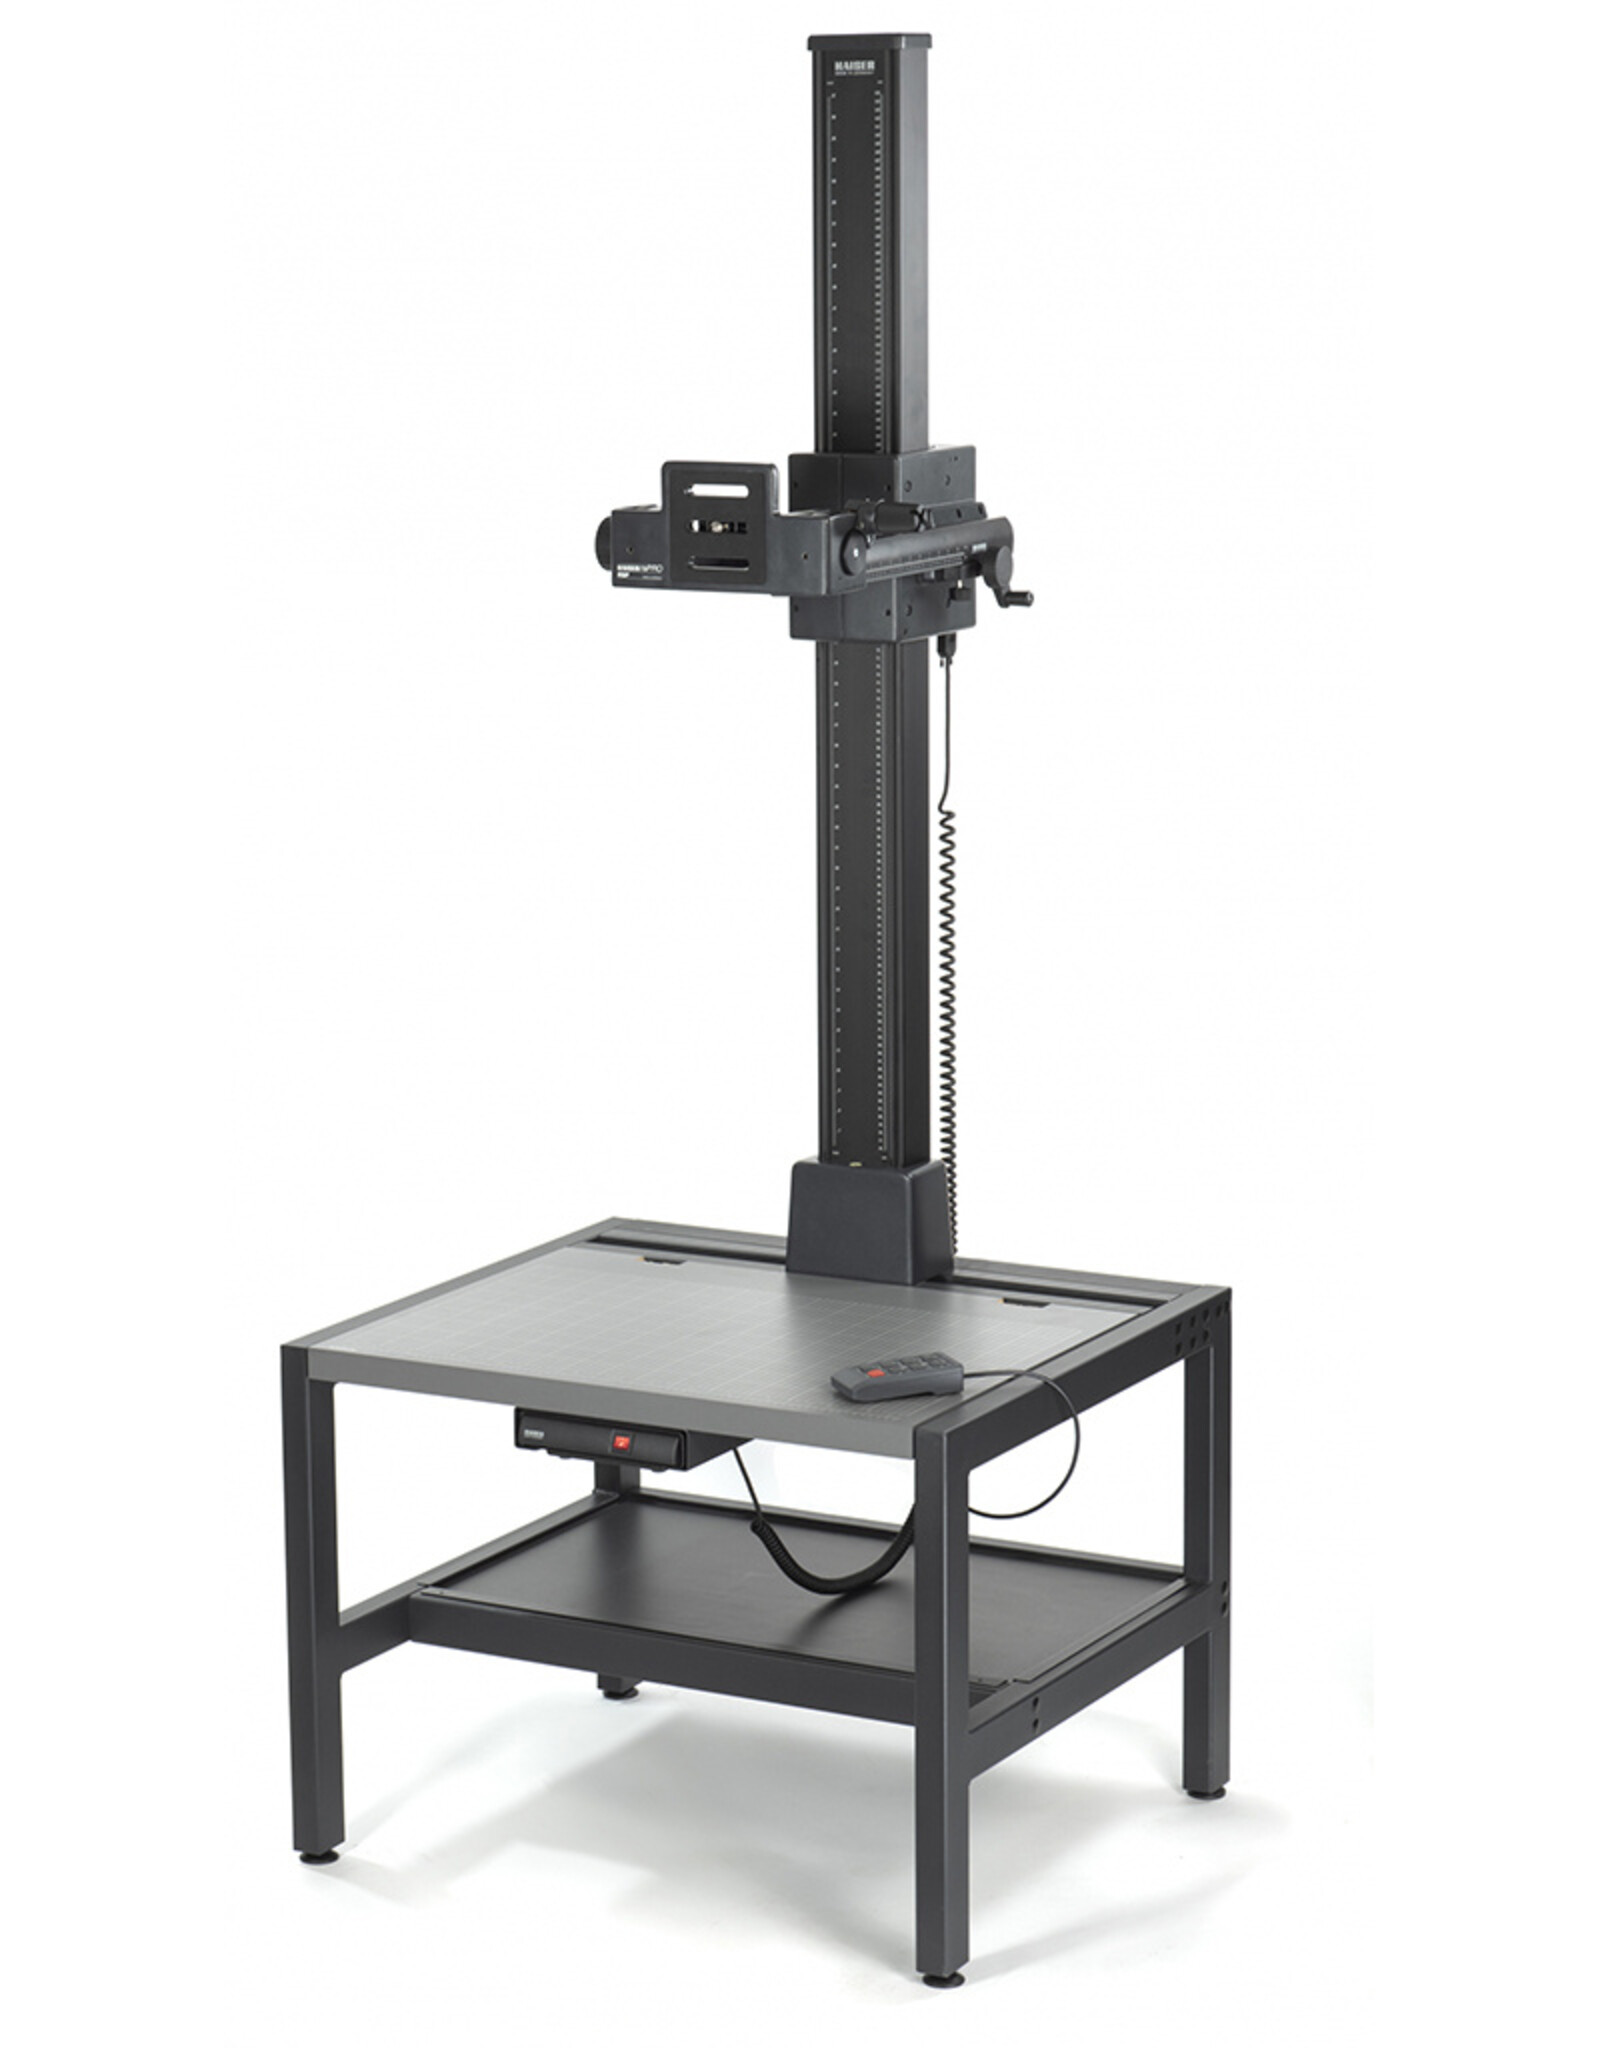 Kaiser DEMO Kaiser rePRO Floor Stand + Baseboard + RSP autoDrive 1.5 meter column with positioning control